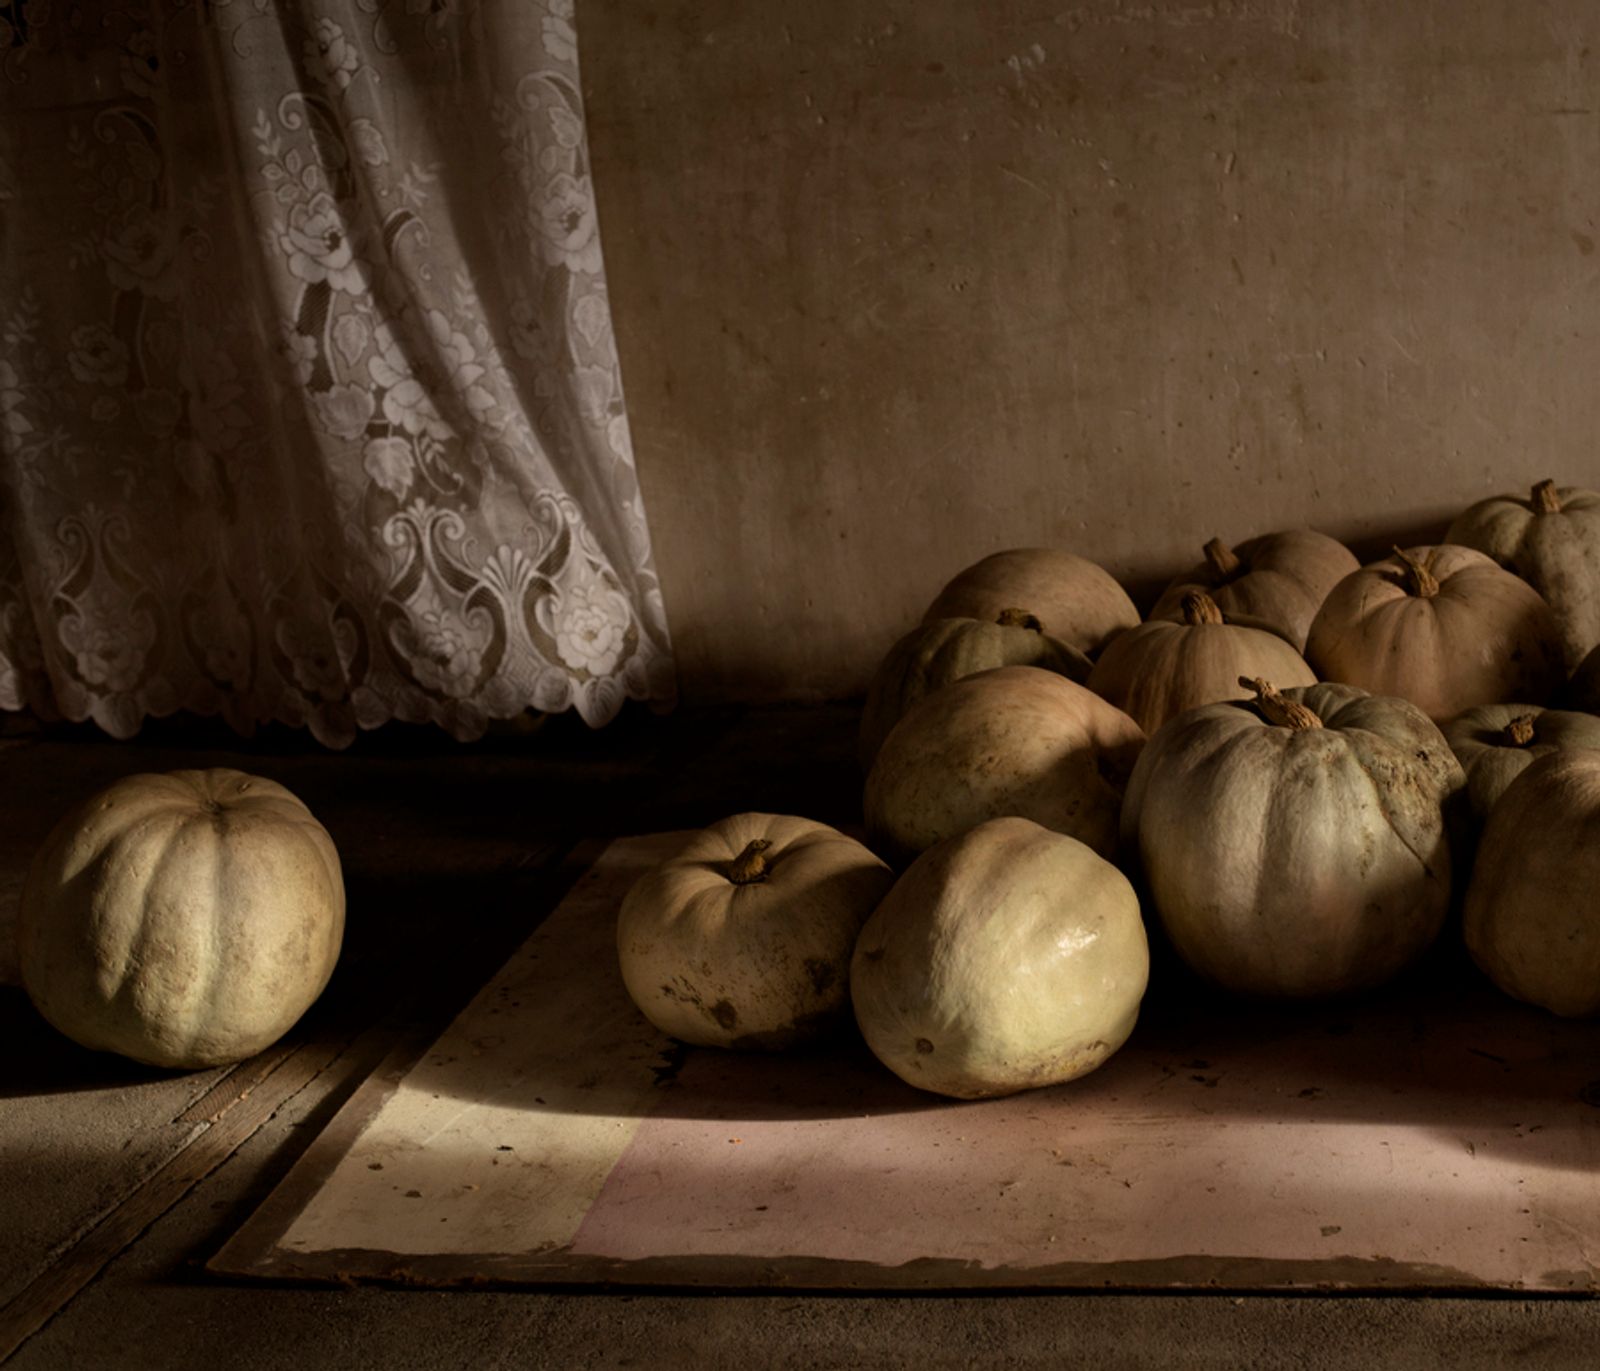 © Myriam Meloni - Image from the Lost in Tradition photography project